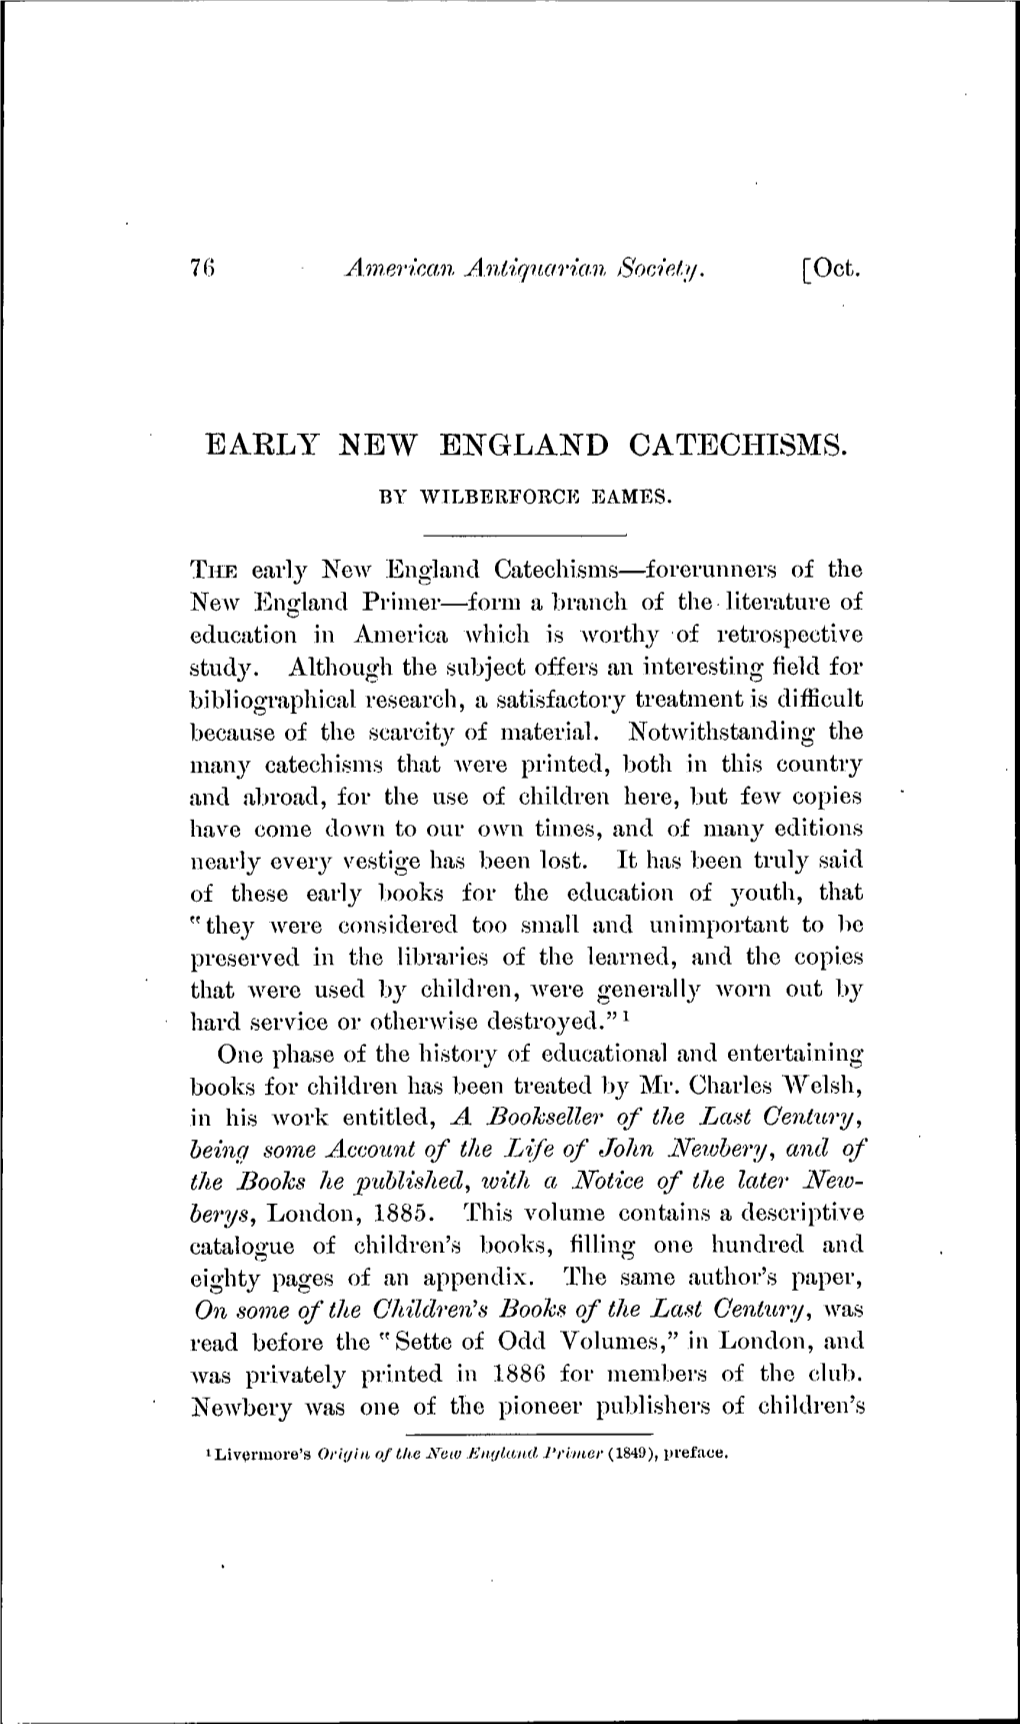 Eaely New England Catechisms. by Wtlberforce Eames